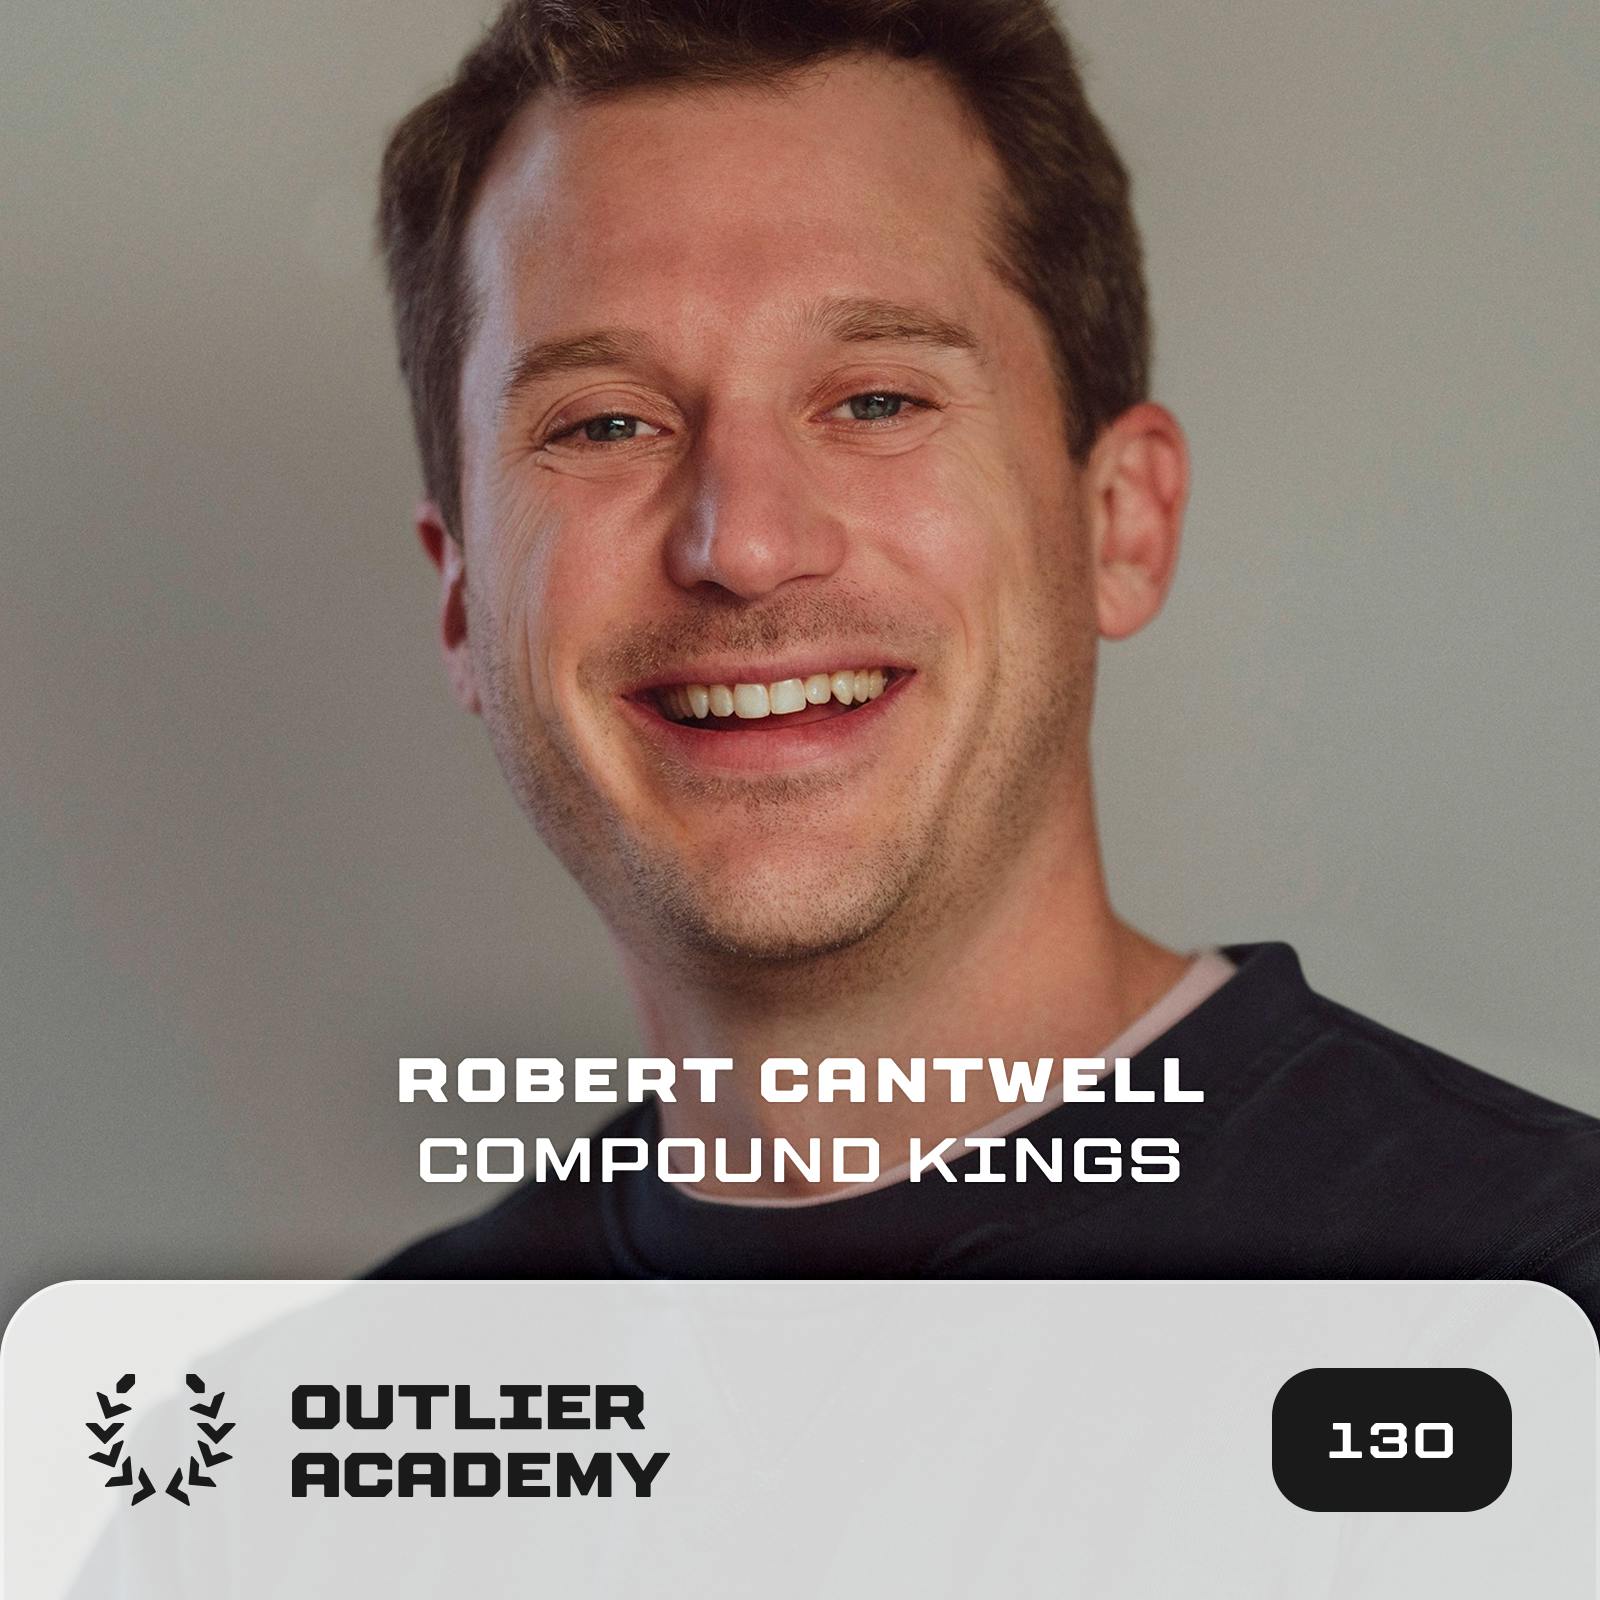 Robert Cantwell of Compound Kings: My Favorite Books, Tools, Habits and More | 20 Minute Playbook